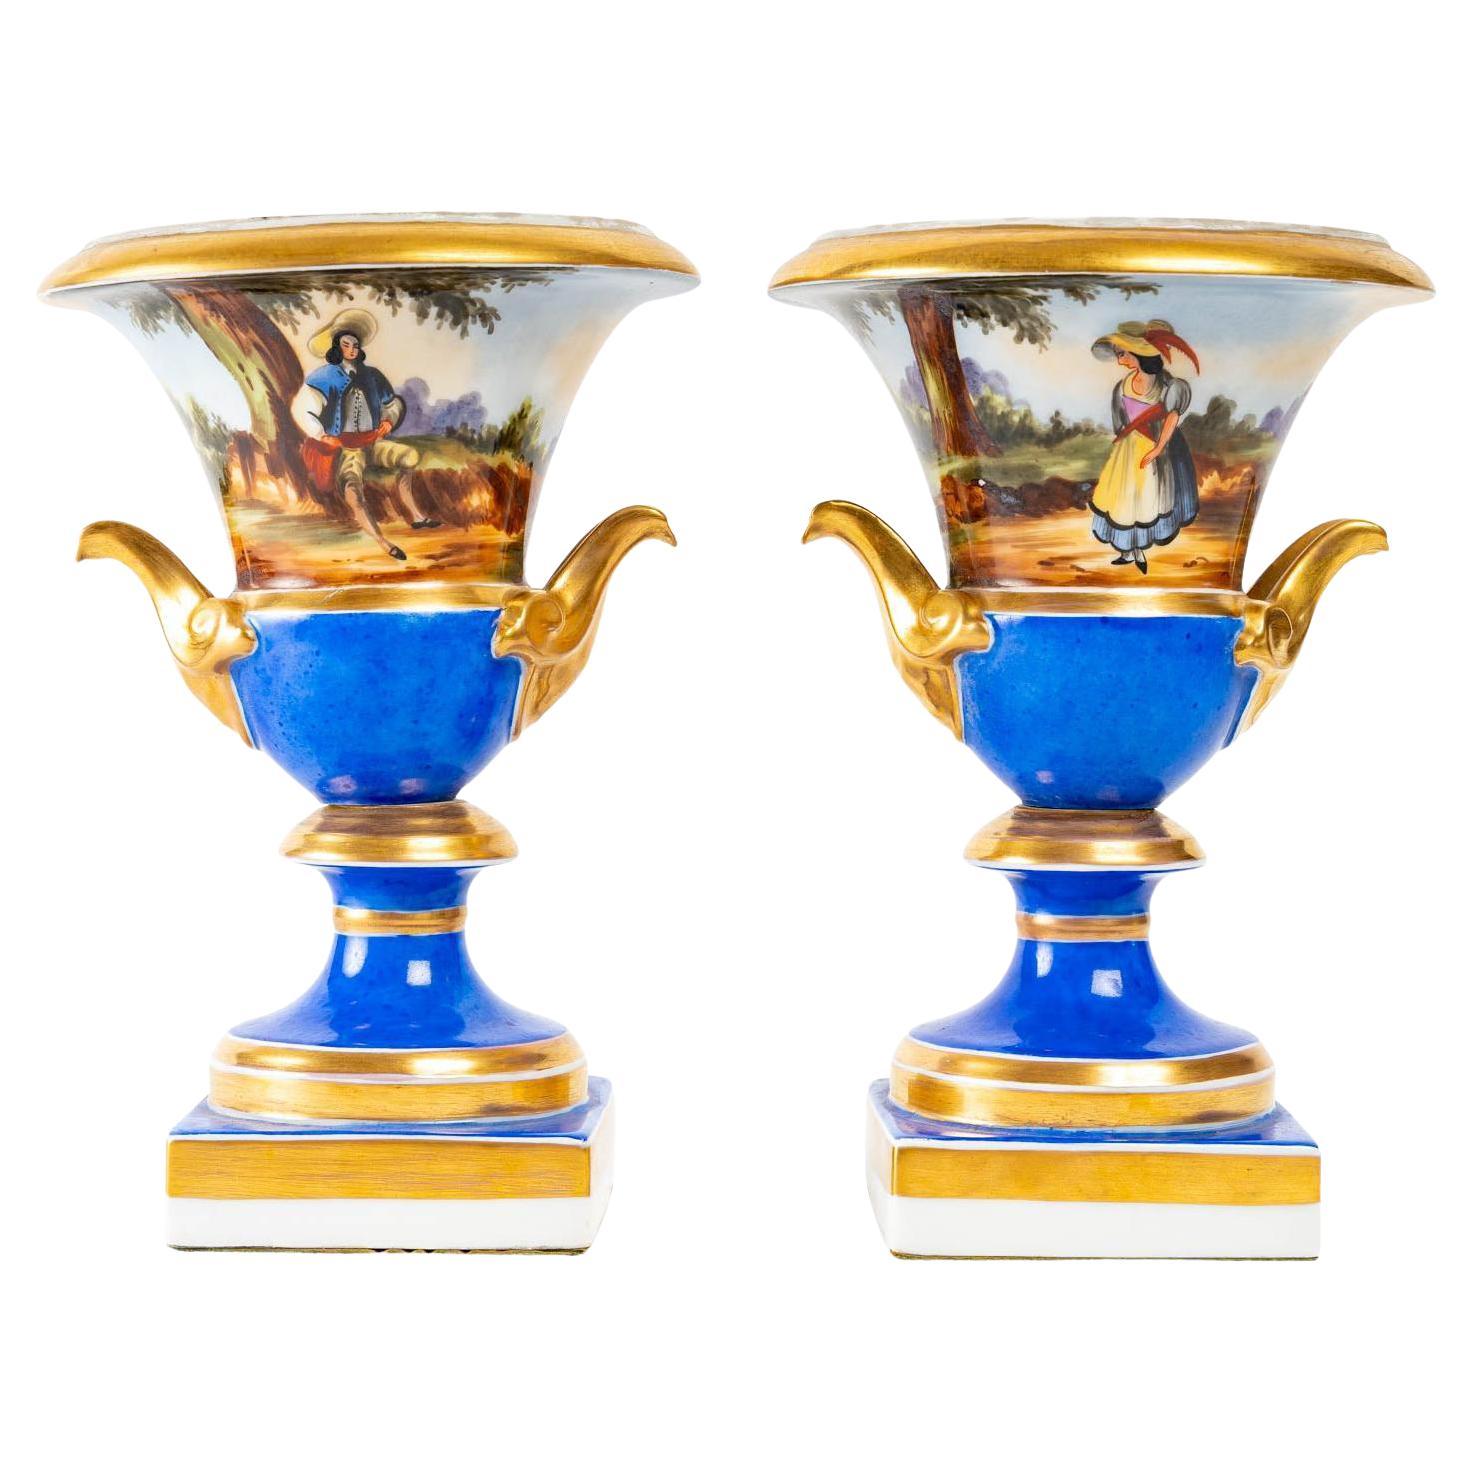 Pair of Small Medicis Vases